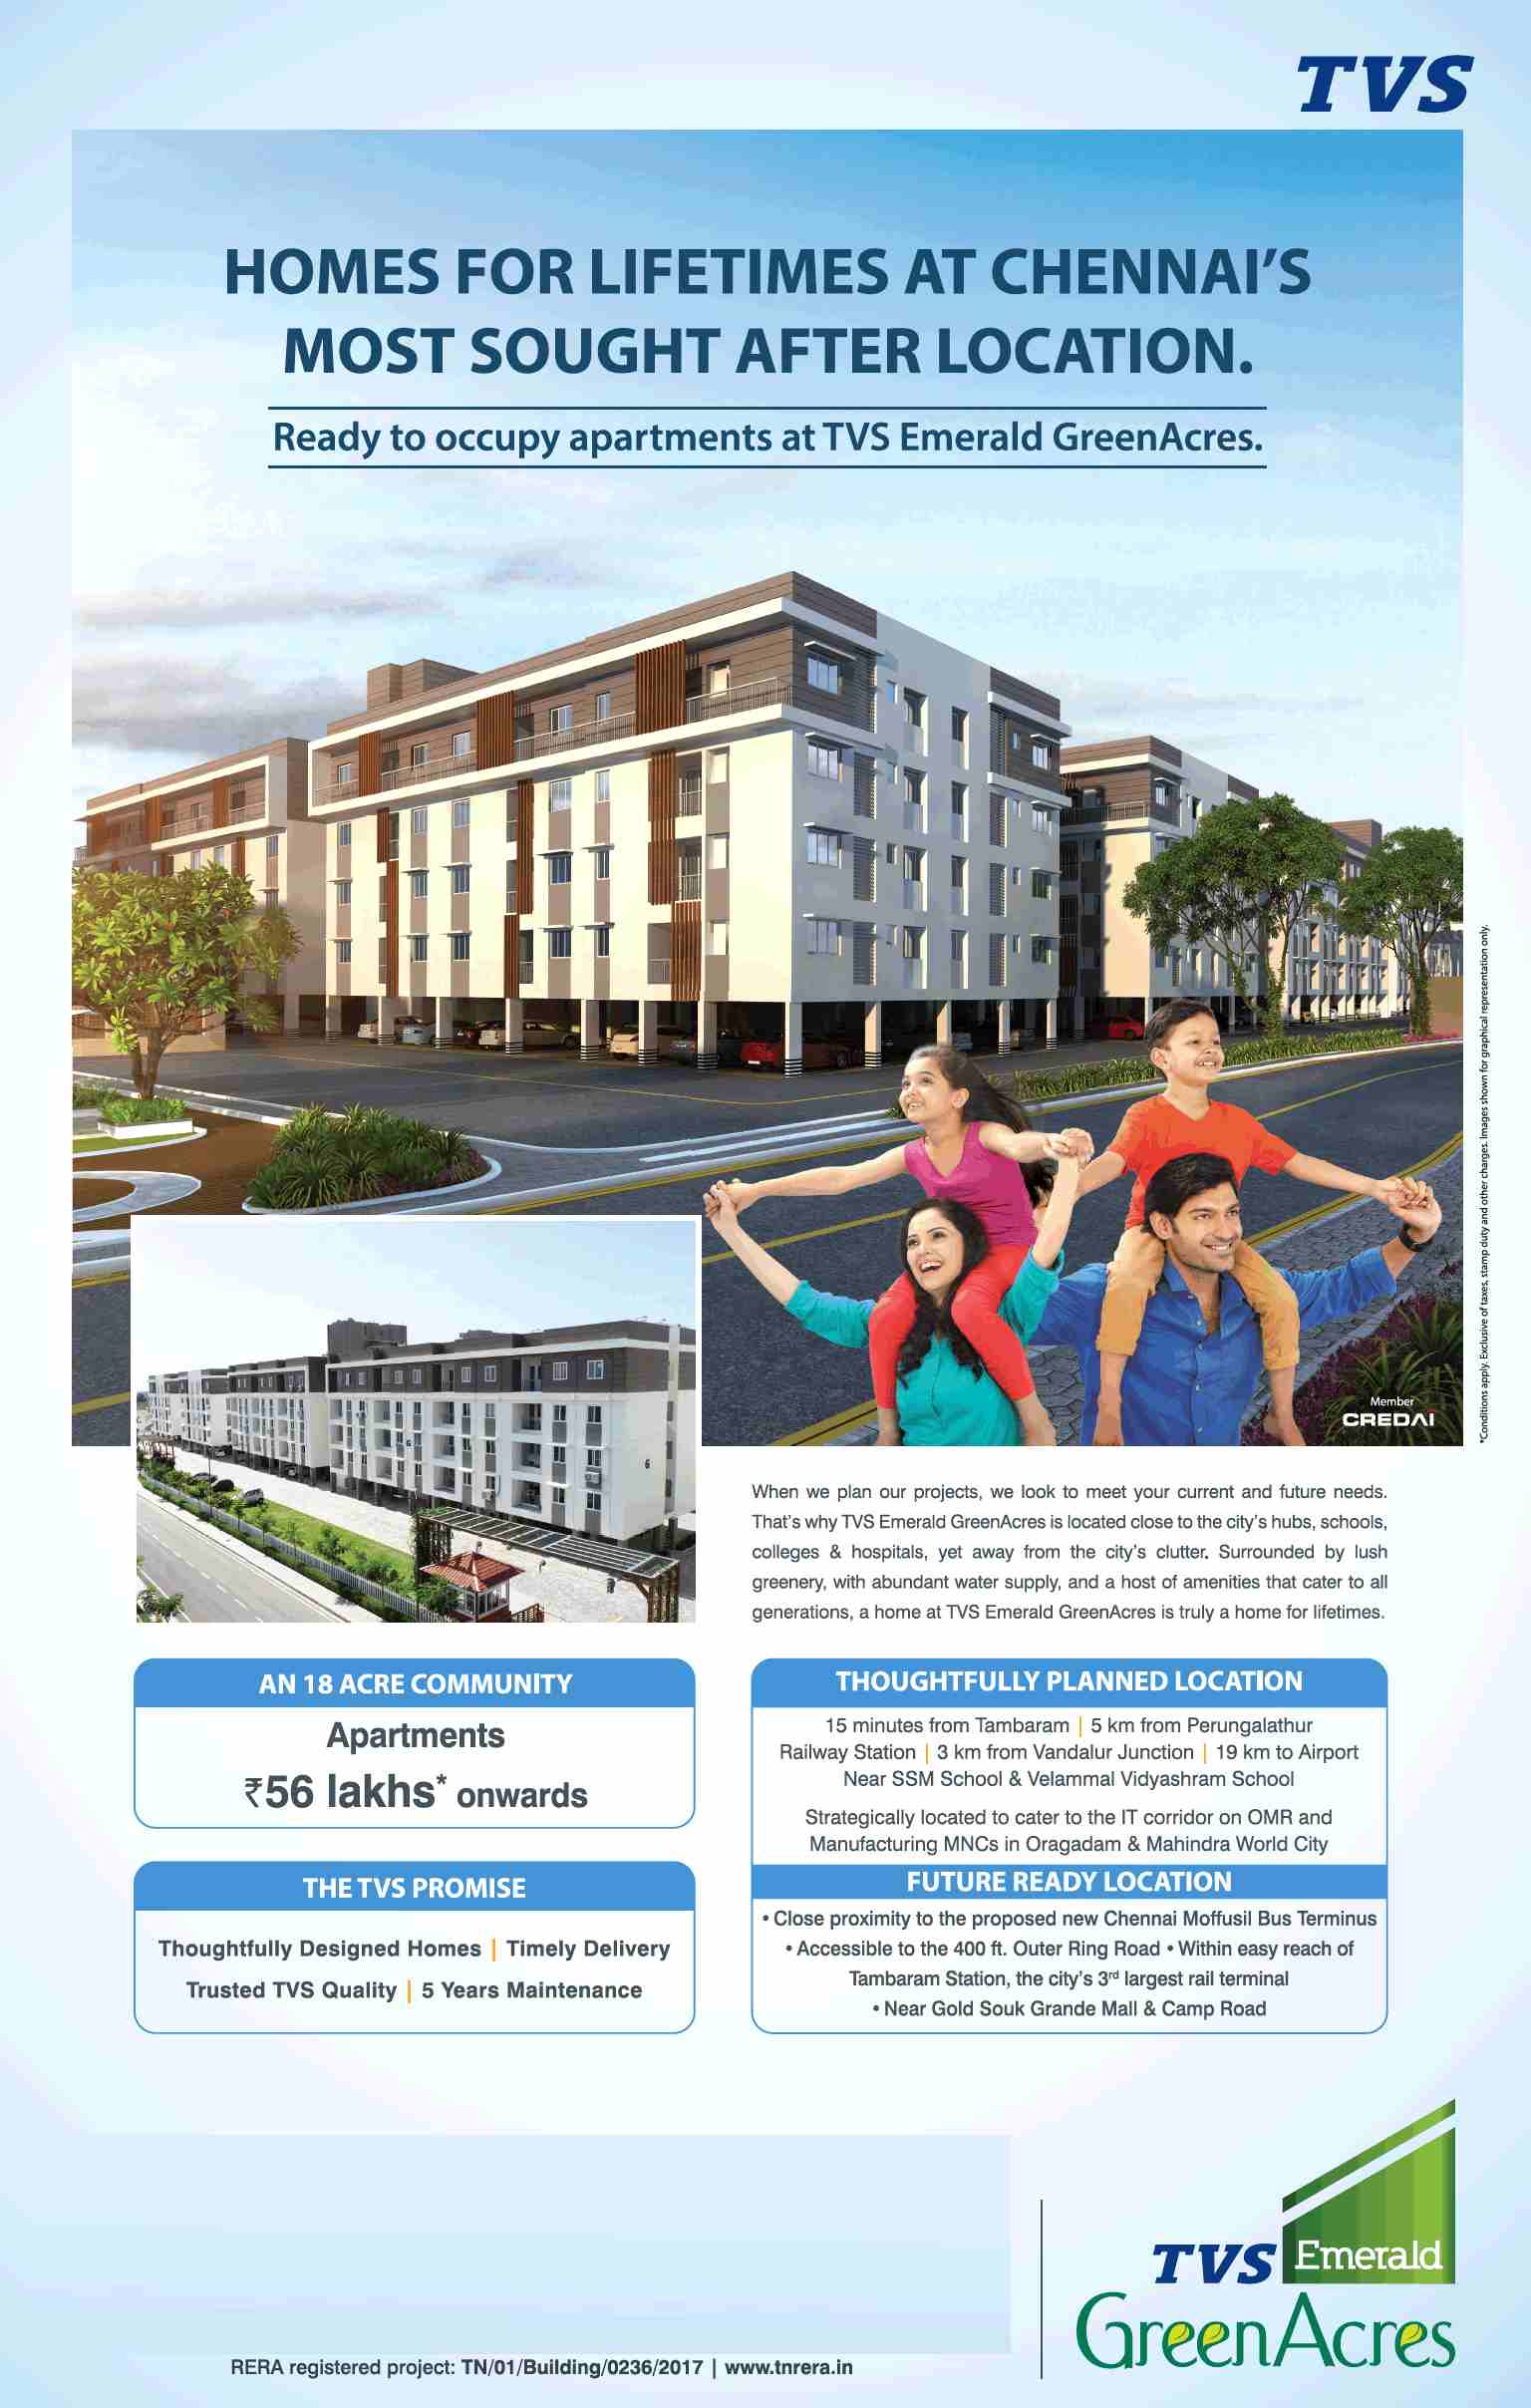 Book ready to move apartments @ Rs 56 lakhs at TVS Emerald Green Acres in Chennai Update